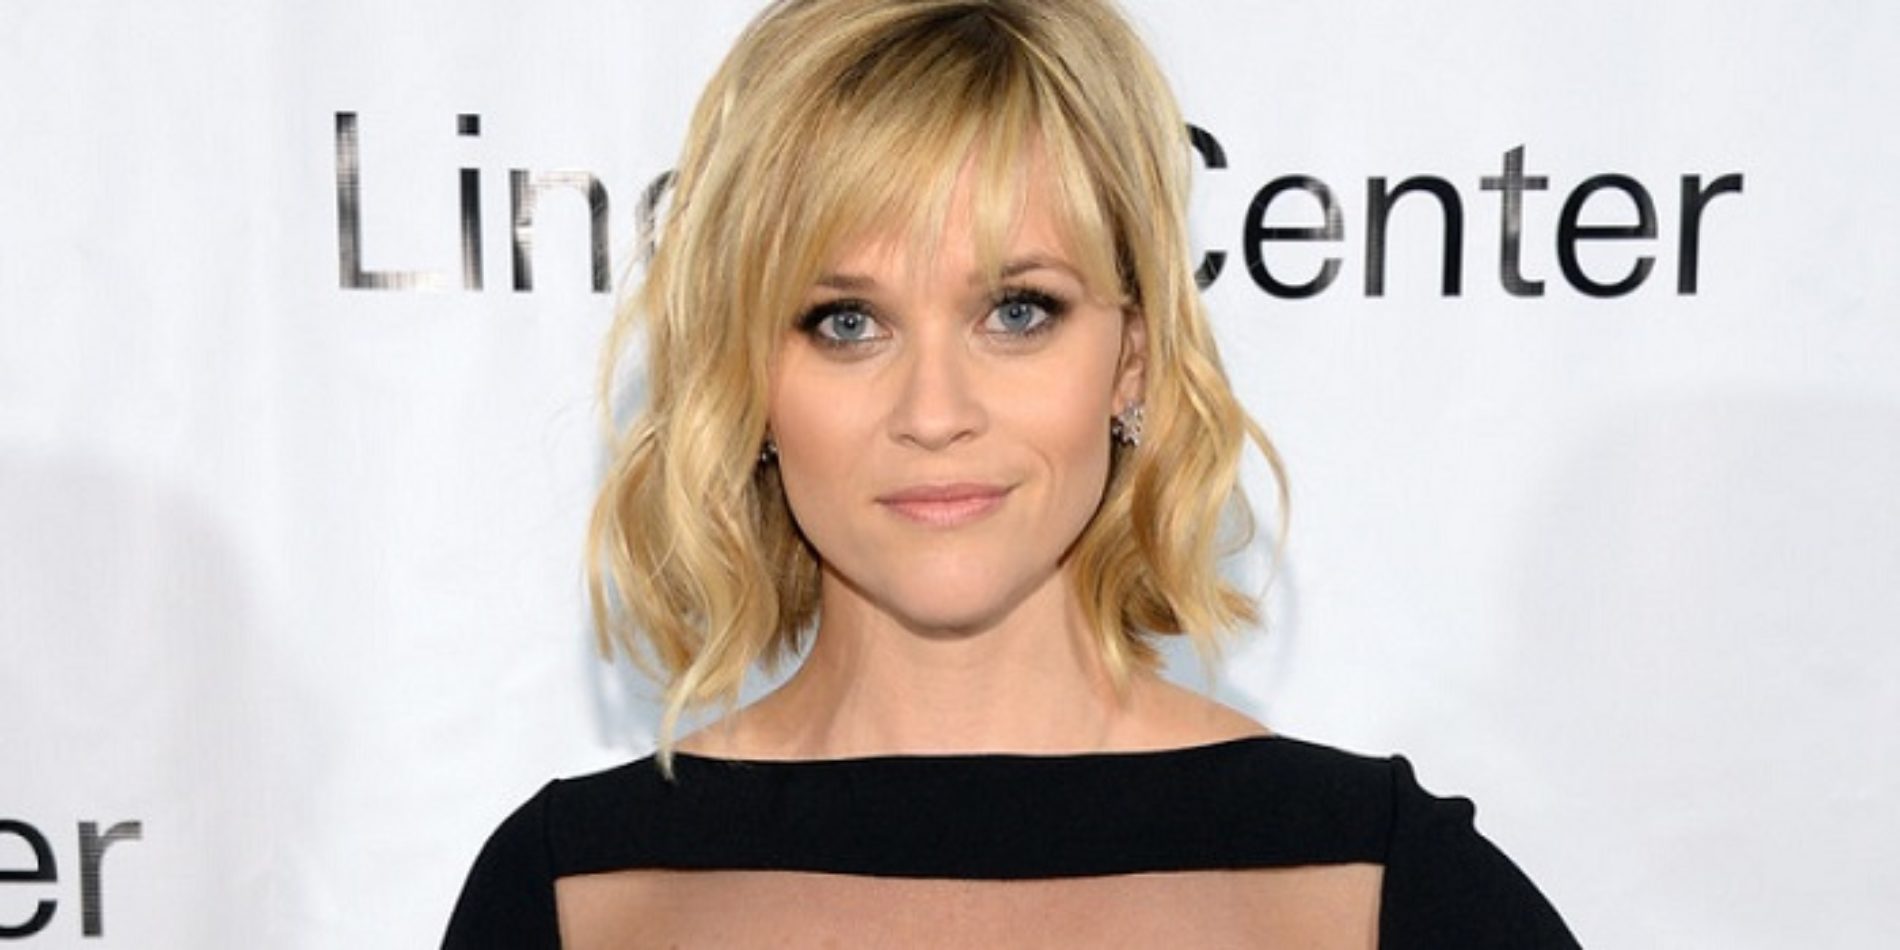 Reese Witherspoon is not a fan of actors who won’t play gay characters